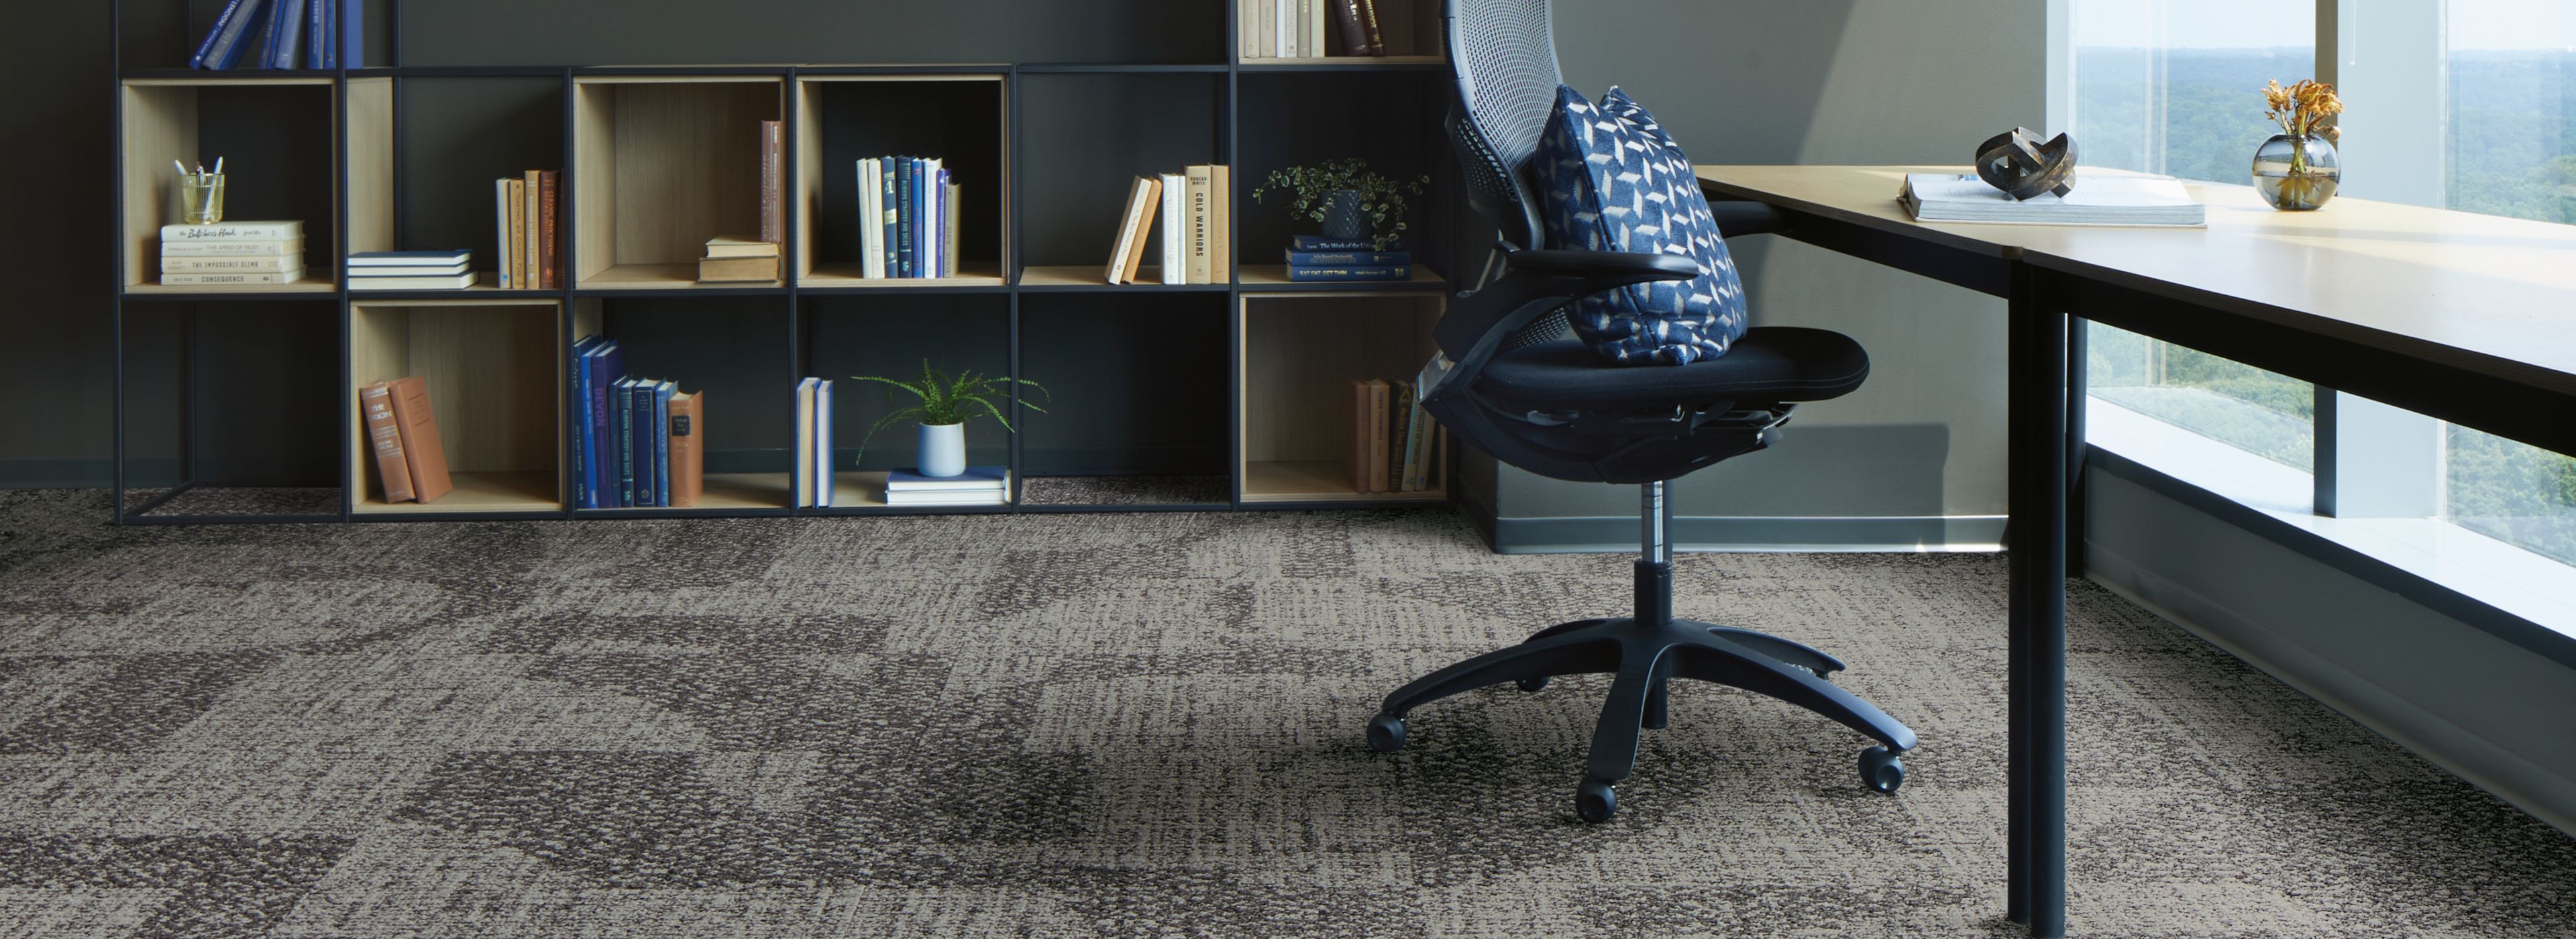 Interface Third Space 302 carpet tile in private office image number 1